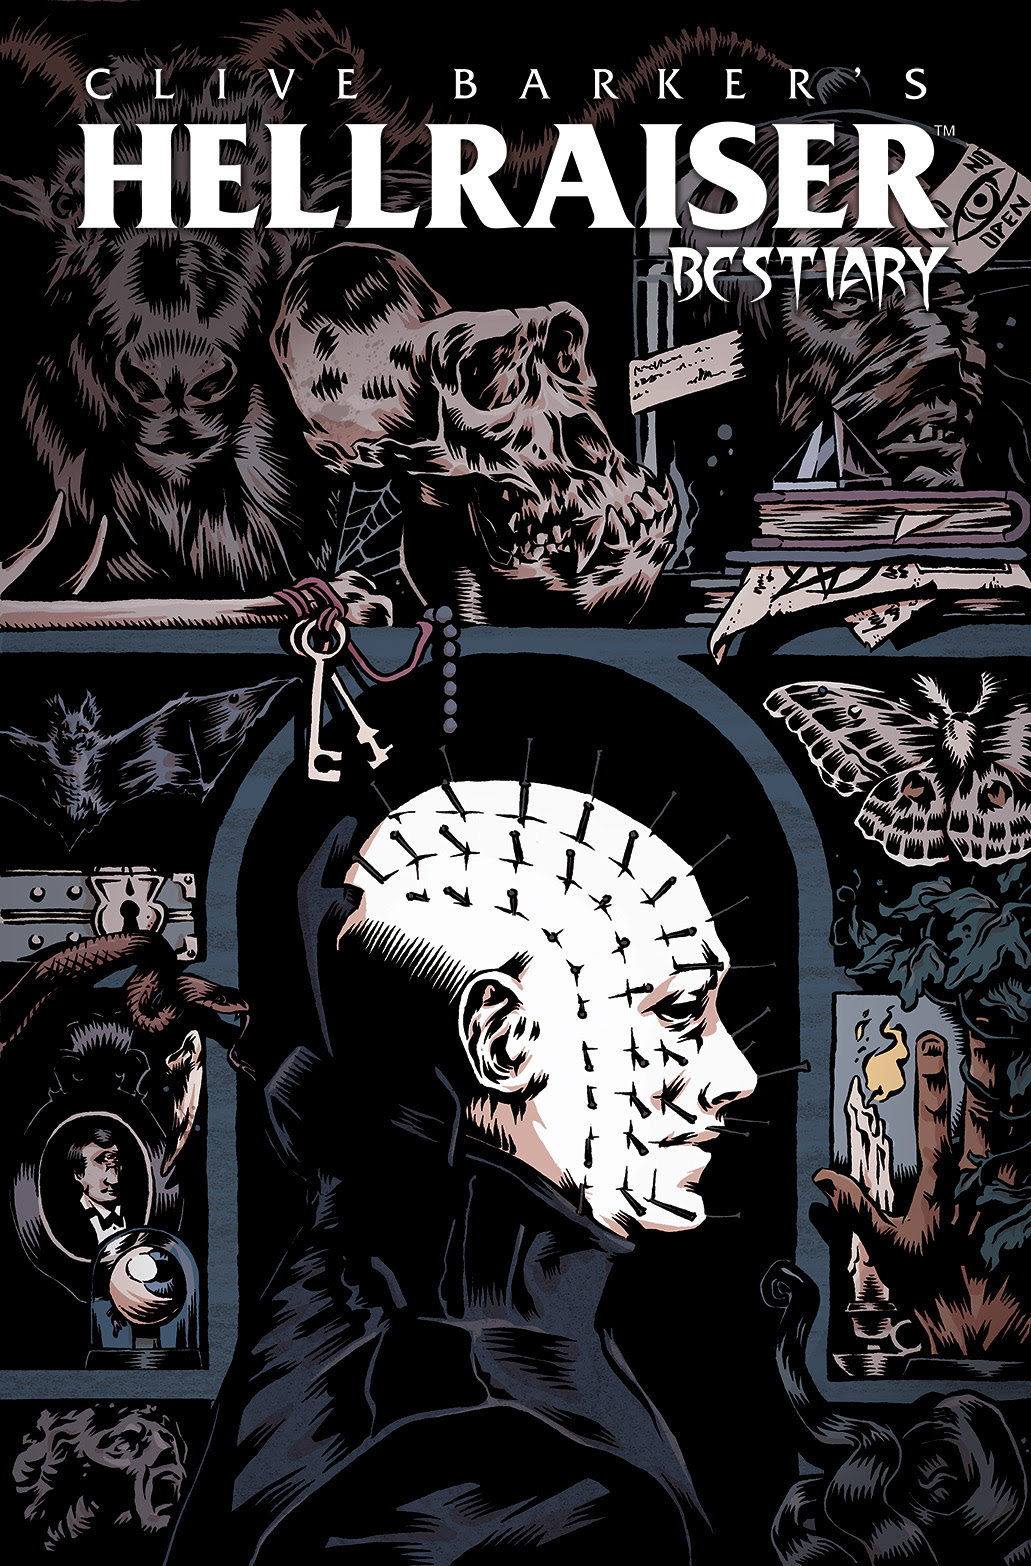 HELLRAISER: BESTIARY Cover A by Conor Nolan